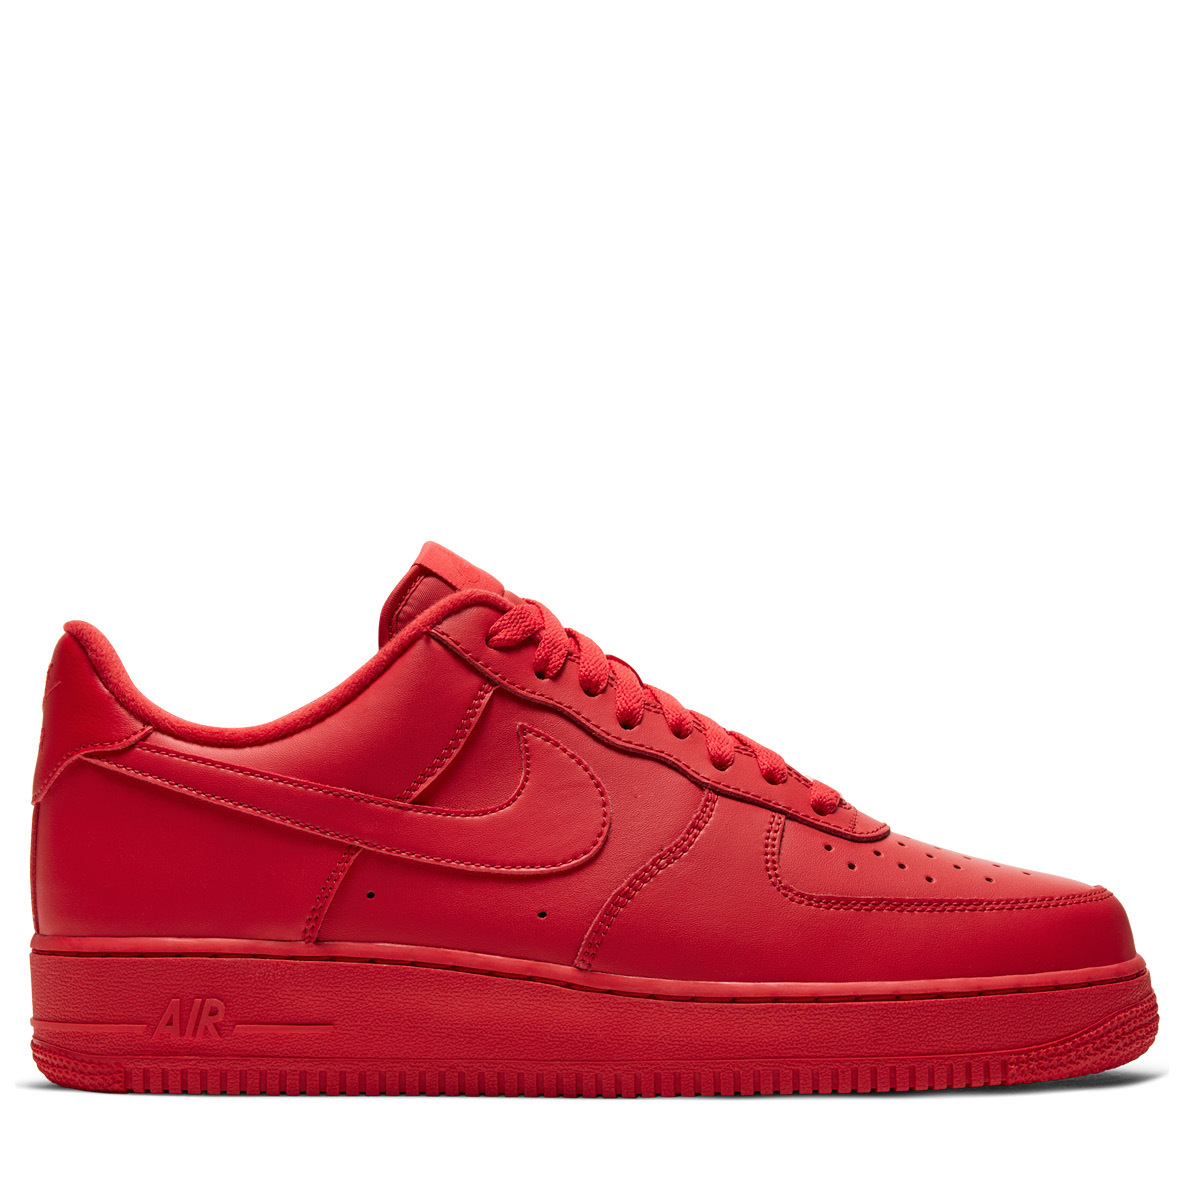 Nike AIR FORCE 1 '07 LV8 University Red/University Red/Black | Hype DC